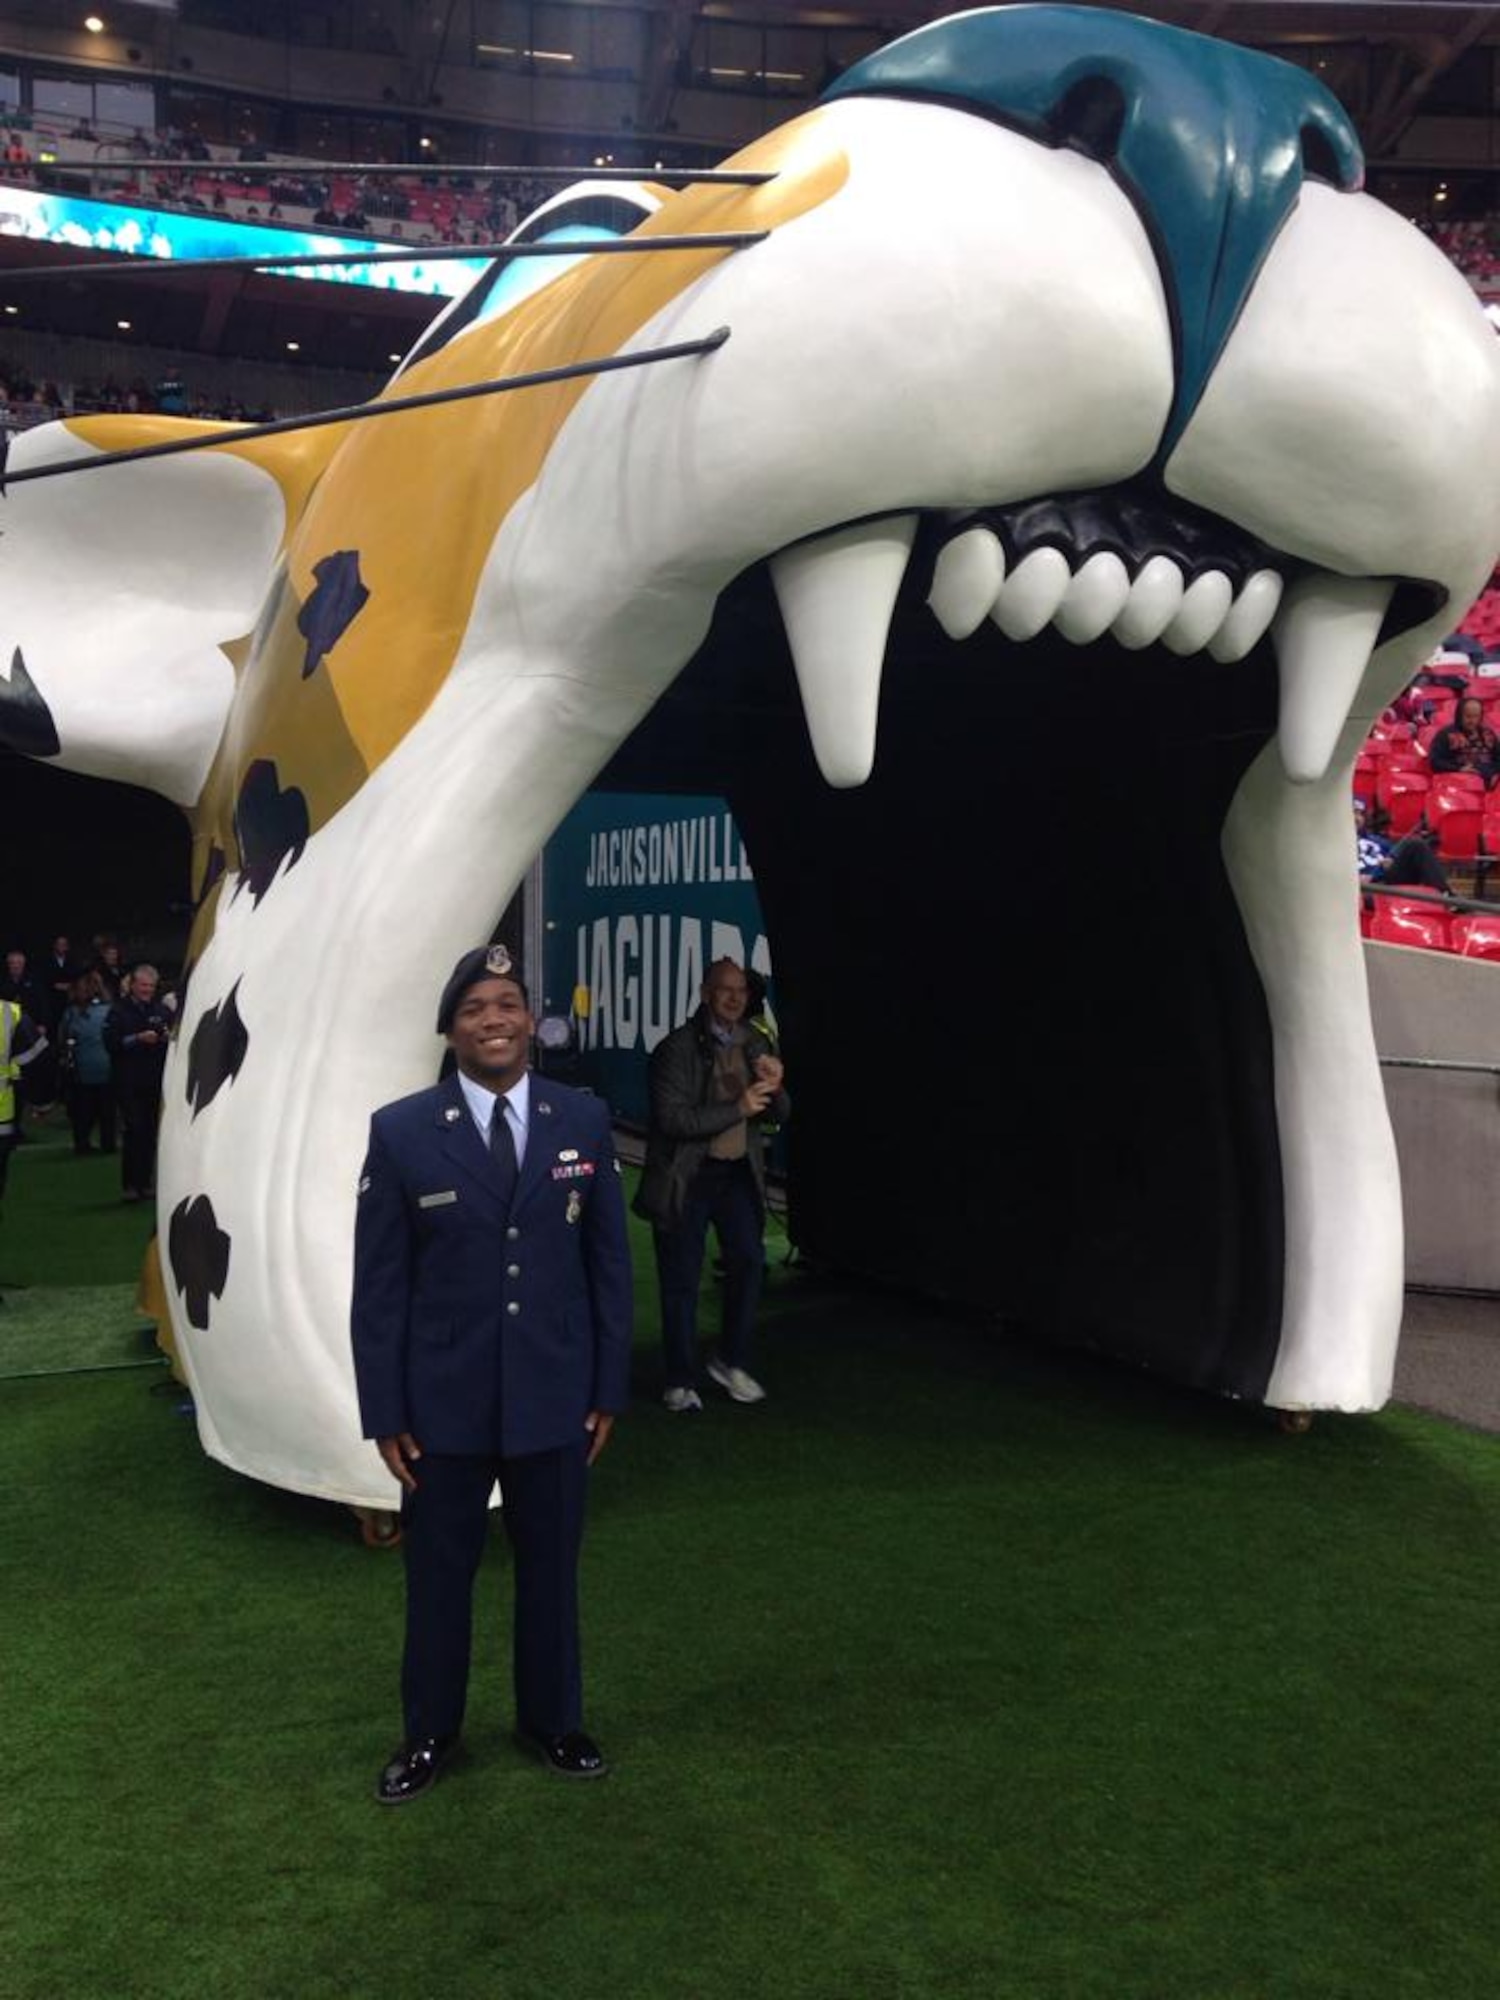 U.S. Air Force Airman 1st Class James Taylor, 100th Security Forces Squadron patrolman, poses for a photograph Oct. 27, 2013, prior to leading the National Football League’s Jacksonville Jaguars onto the field at Wembey Stadium in London, England. Taylor's leadership presented him with this surprise opportunity to represent the U.S. Air Force and his hometown NFL team.  The NFL gave Taylor and U.S. Air Force Airman Sara V. Summers, 48th Security Forces Squadron patrolman from RAF Lakenheath, the opportunity to lead rival football teams onto the field.  (Courtesy Photo from Angel Trejo)